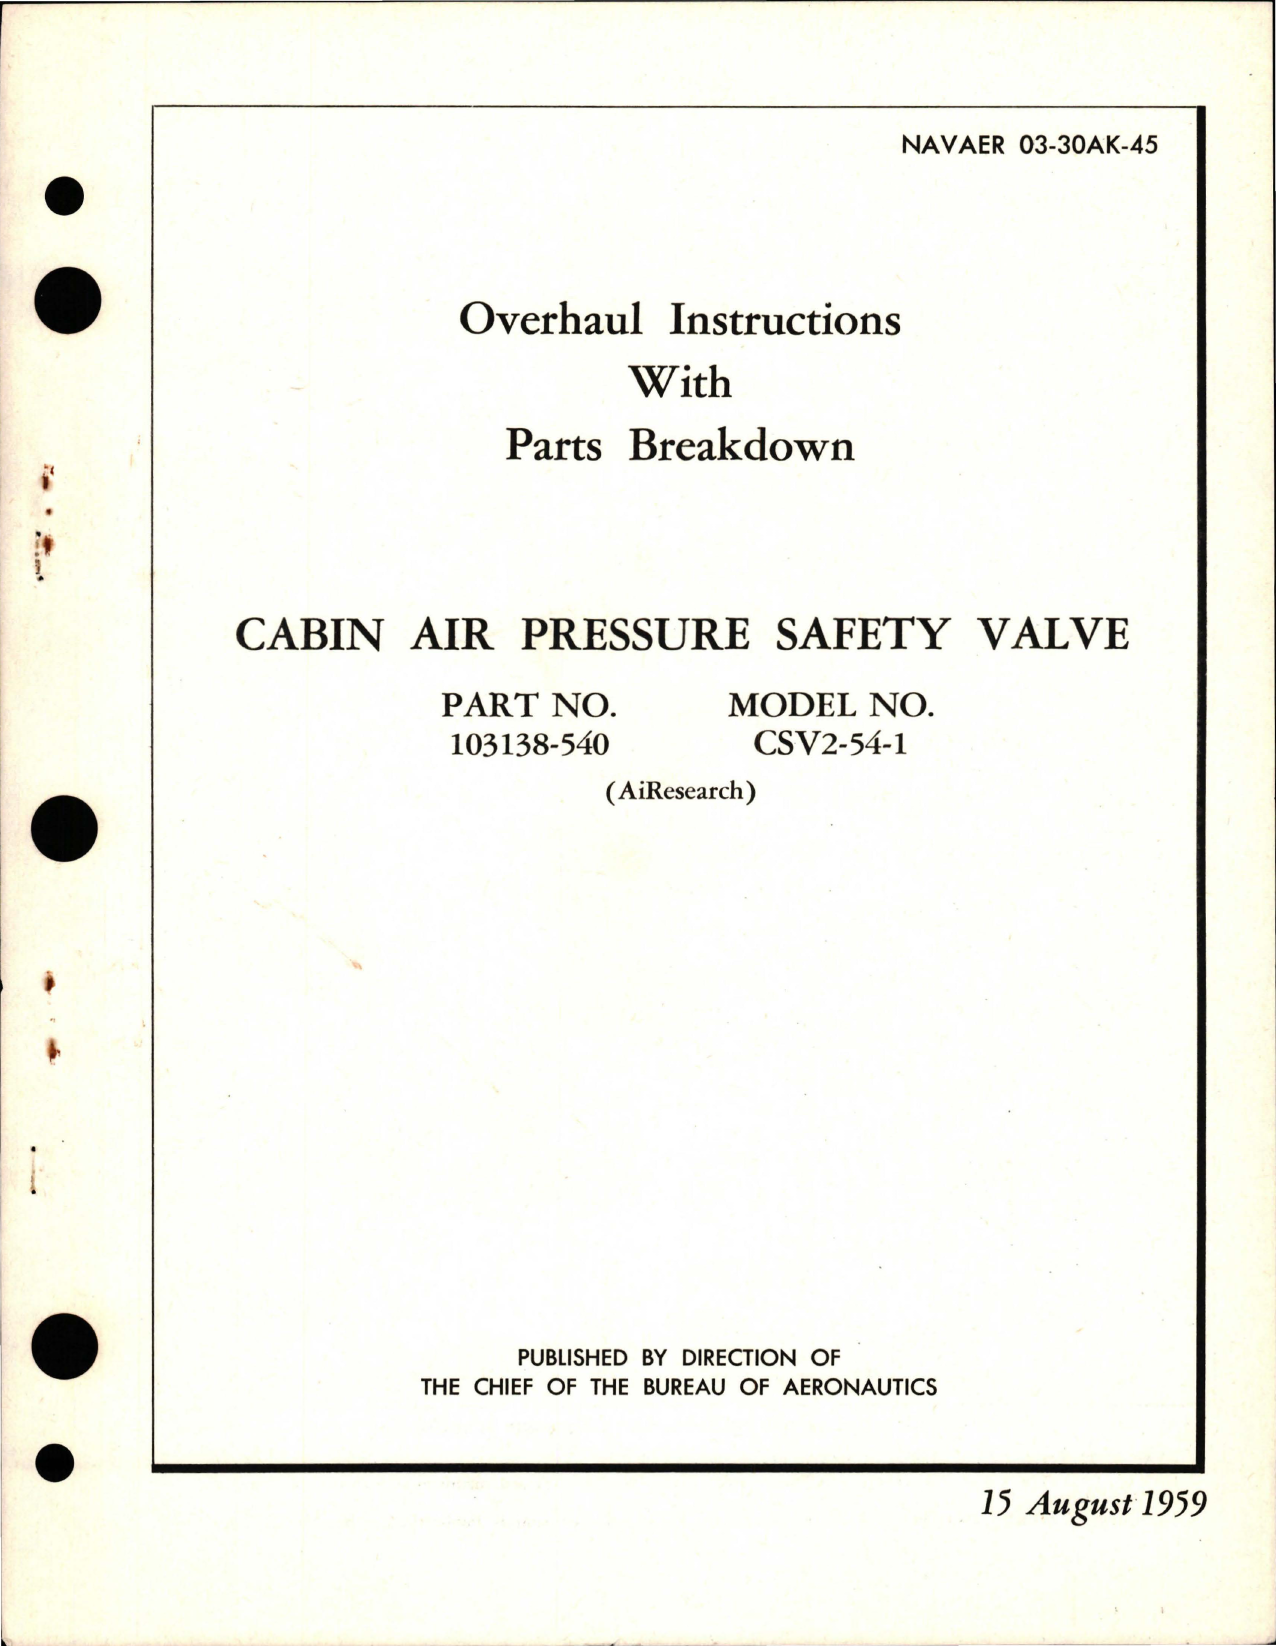 Sample page 1 from AirCorps Library document: Overhaul Instructions with Parts Breakdown for Cabin Air Pressure Safety Valve - Part 103138-540 - Model CSV2-54-1 